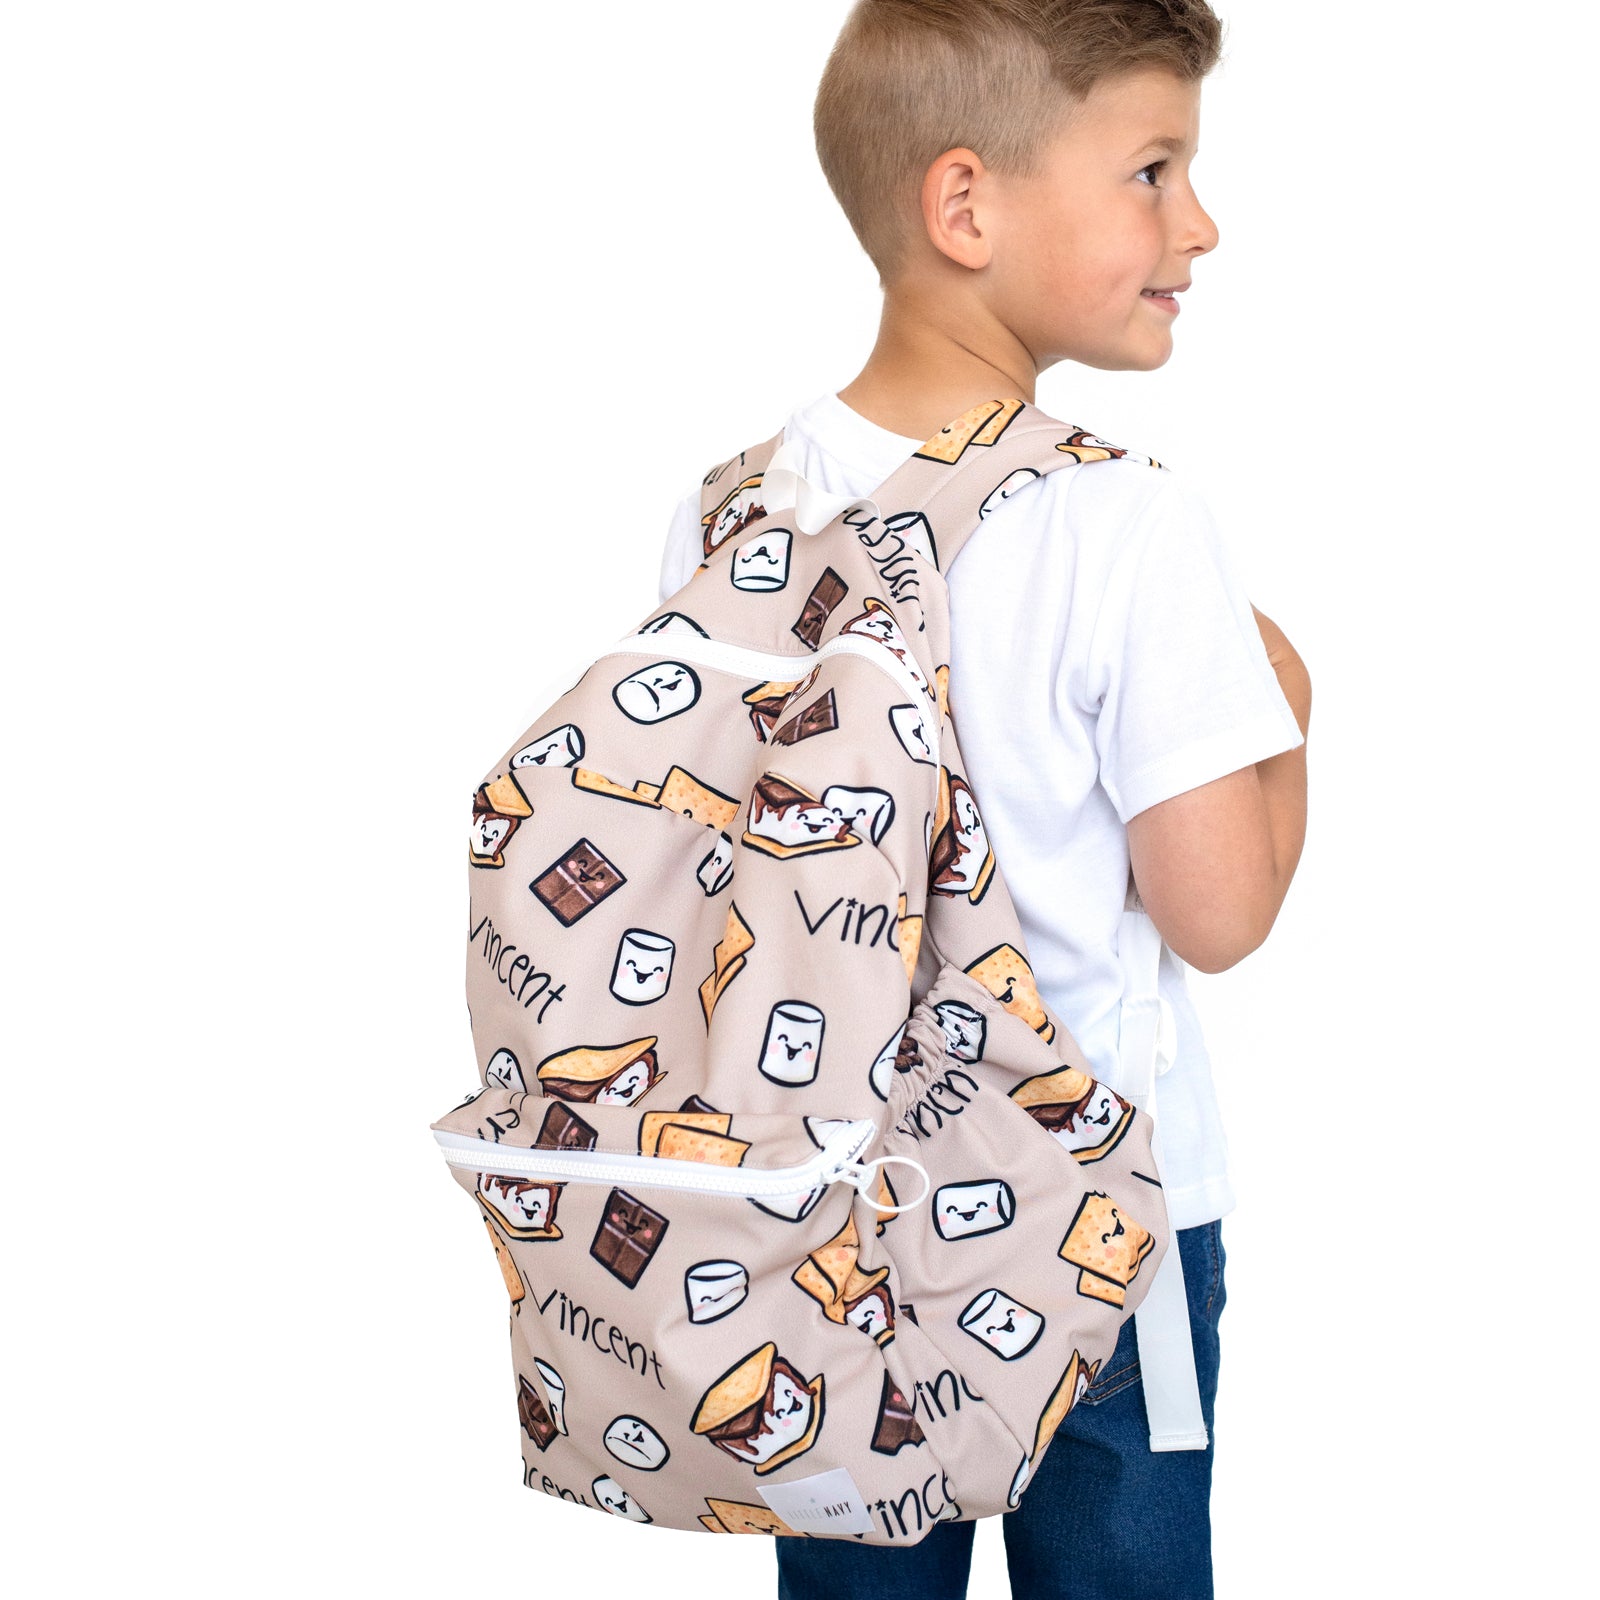 Personalized BackPack